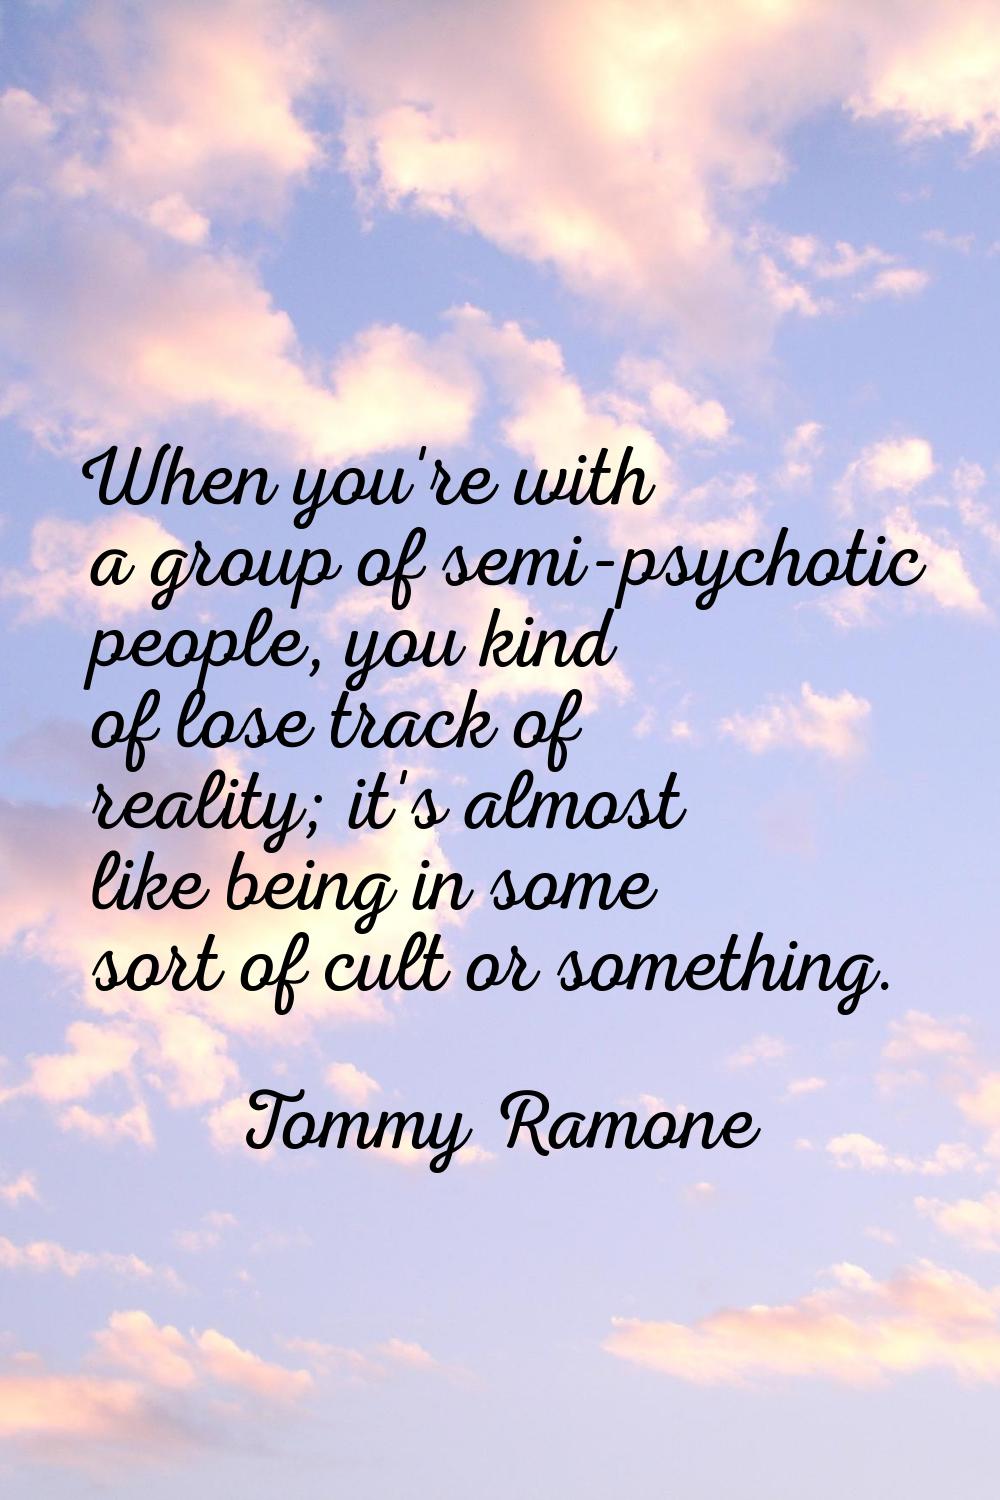 When you're with a group of semi-psychotic people, you kind of lose track of reality; it's almost l